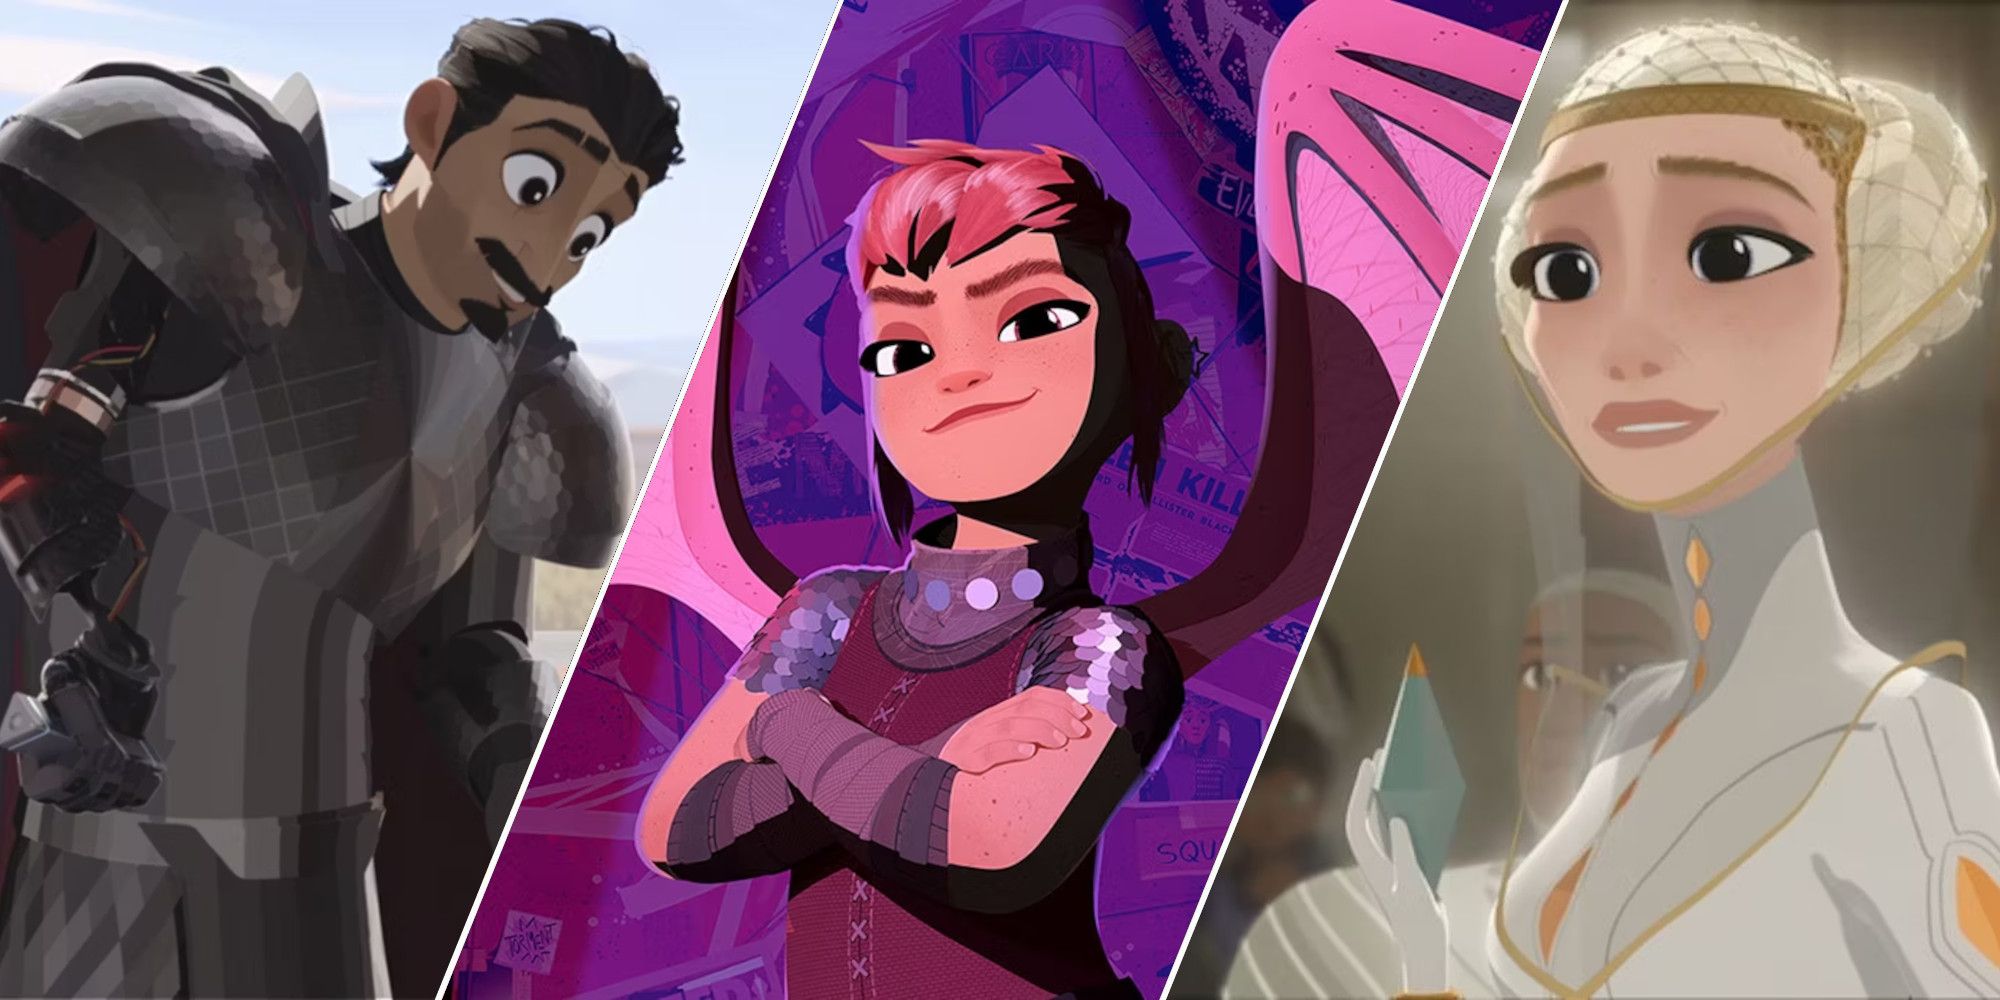 A collage of characters from the film Nimona, featuring Ballister Boldheart, Nimona, and The Director